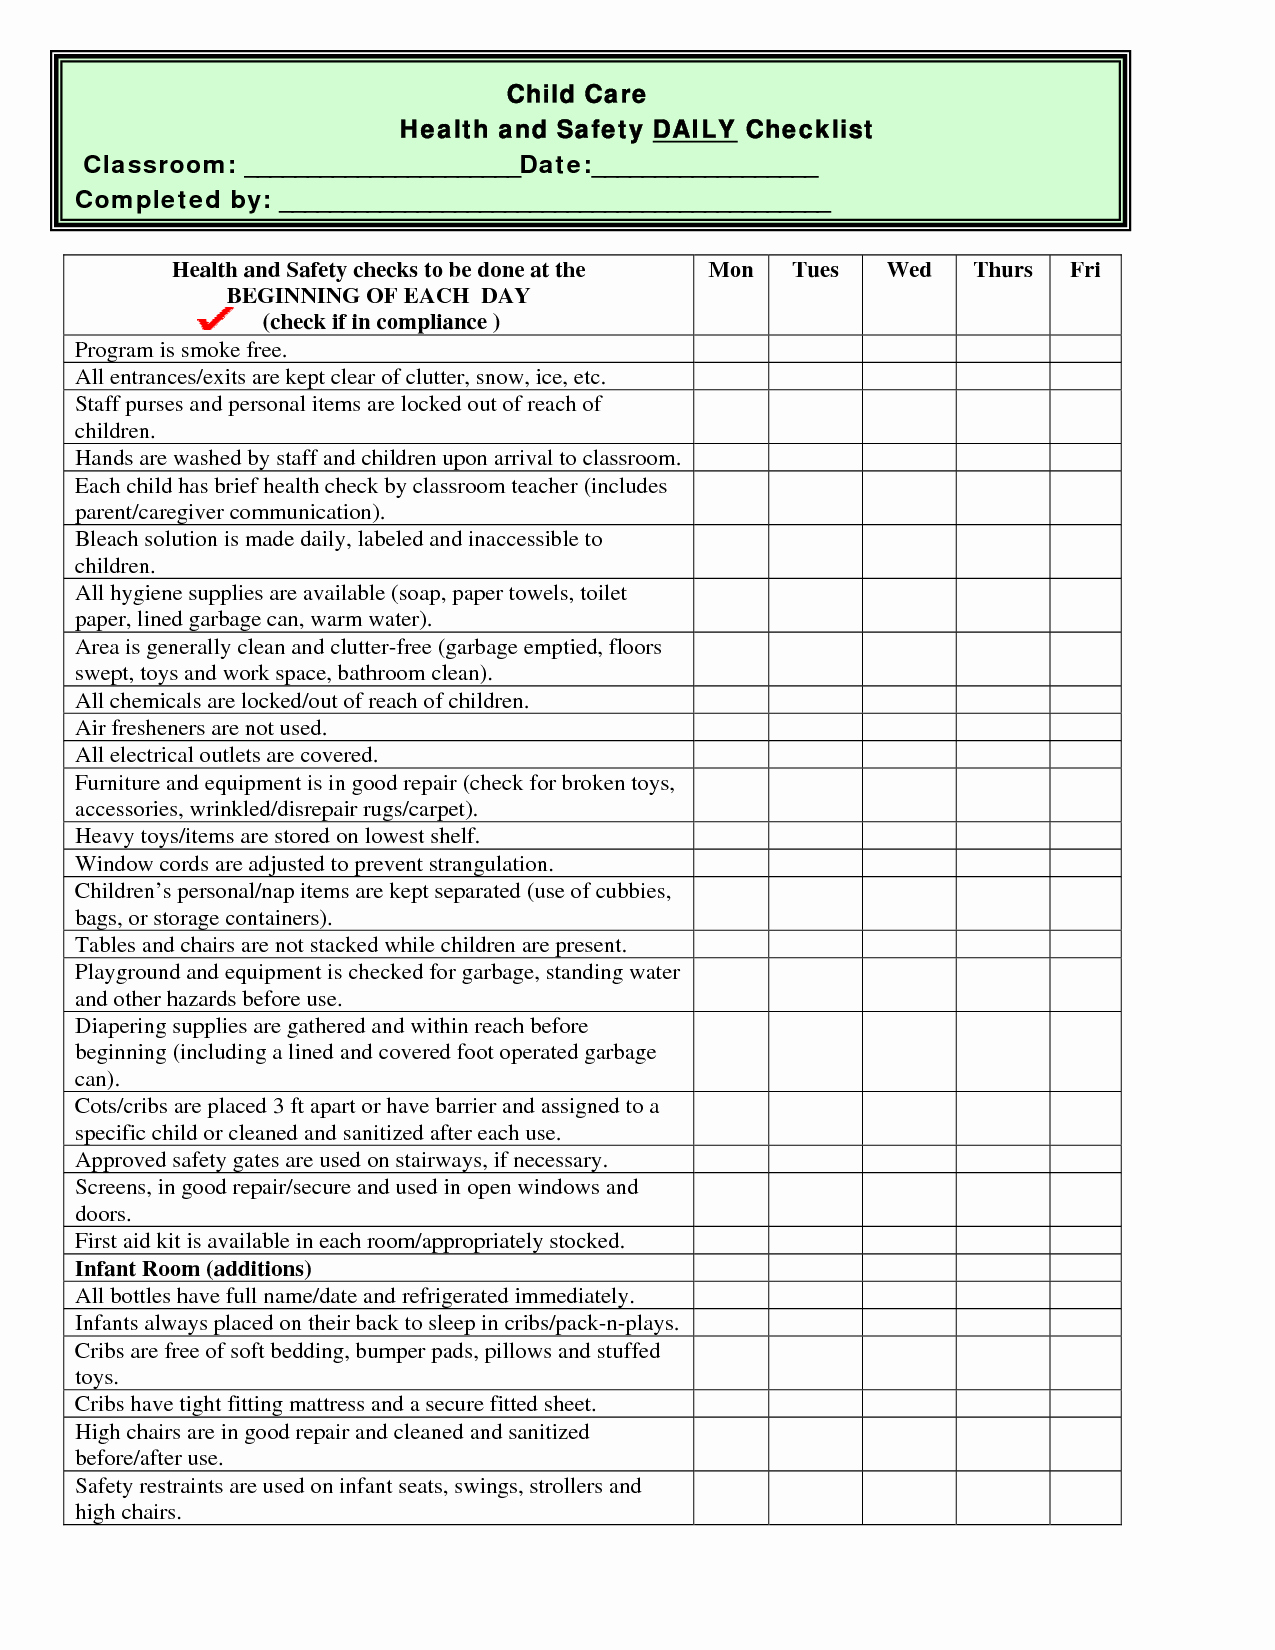 Safety Plan Template for Students Lovely Child Care Health and Safety Daily Checklist Classroom